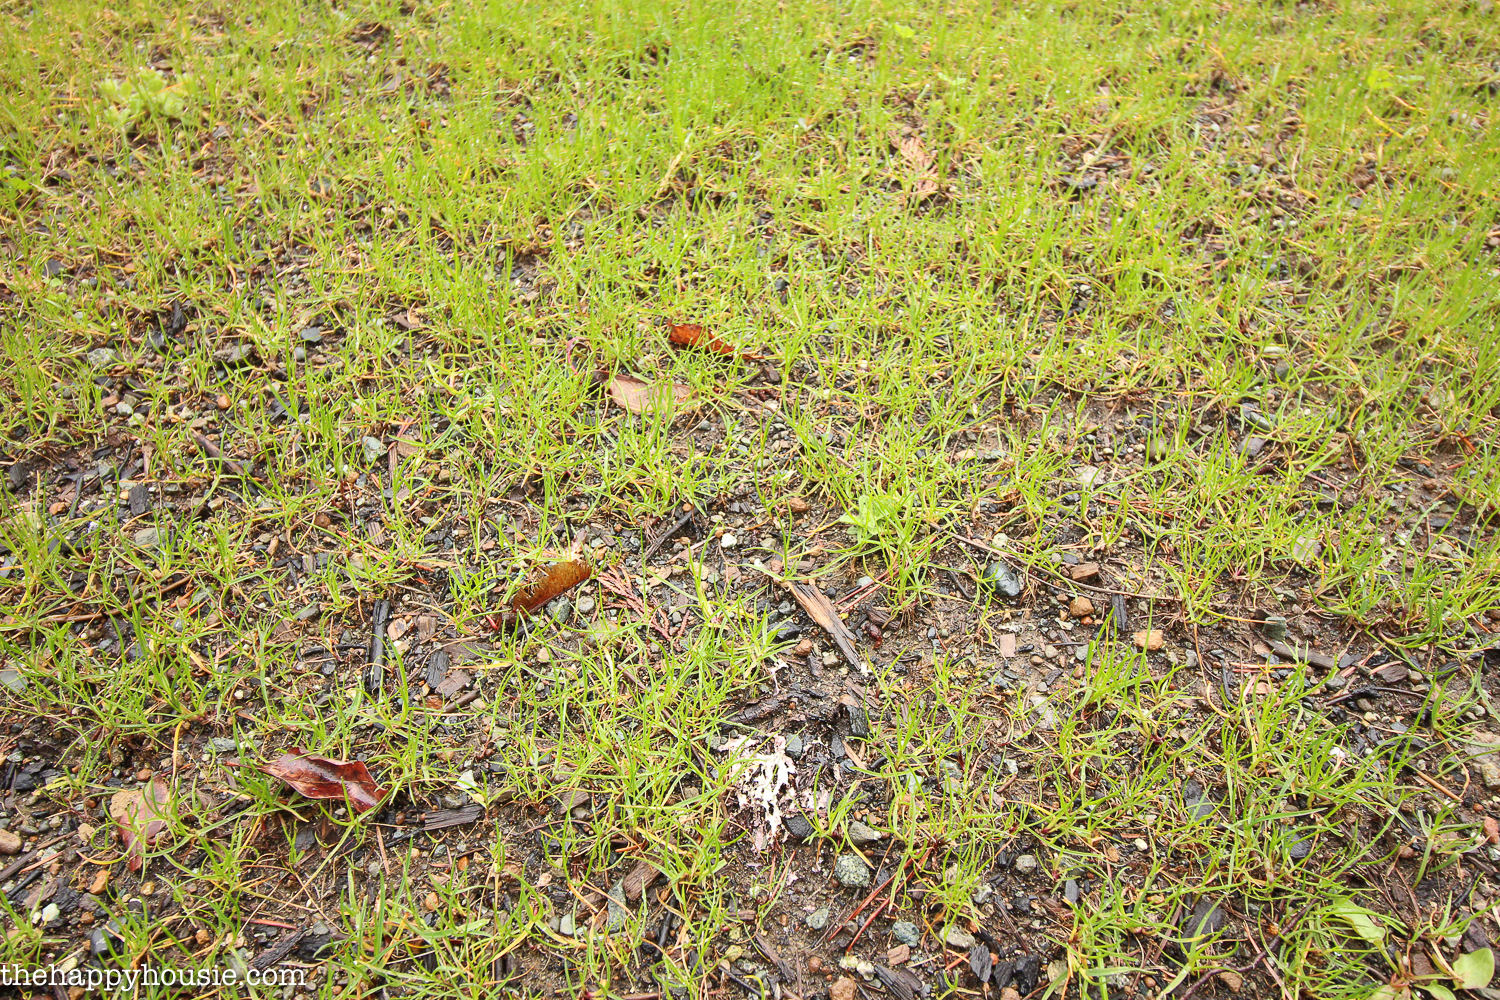 Growing grass in the yard.